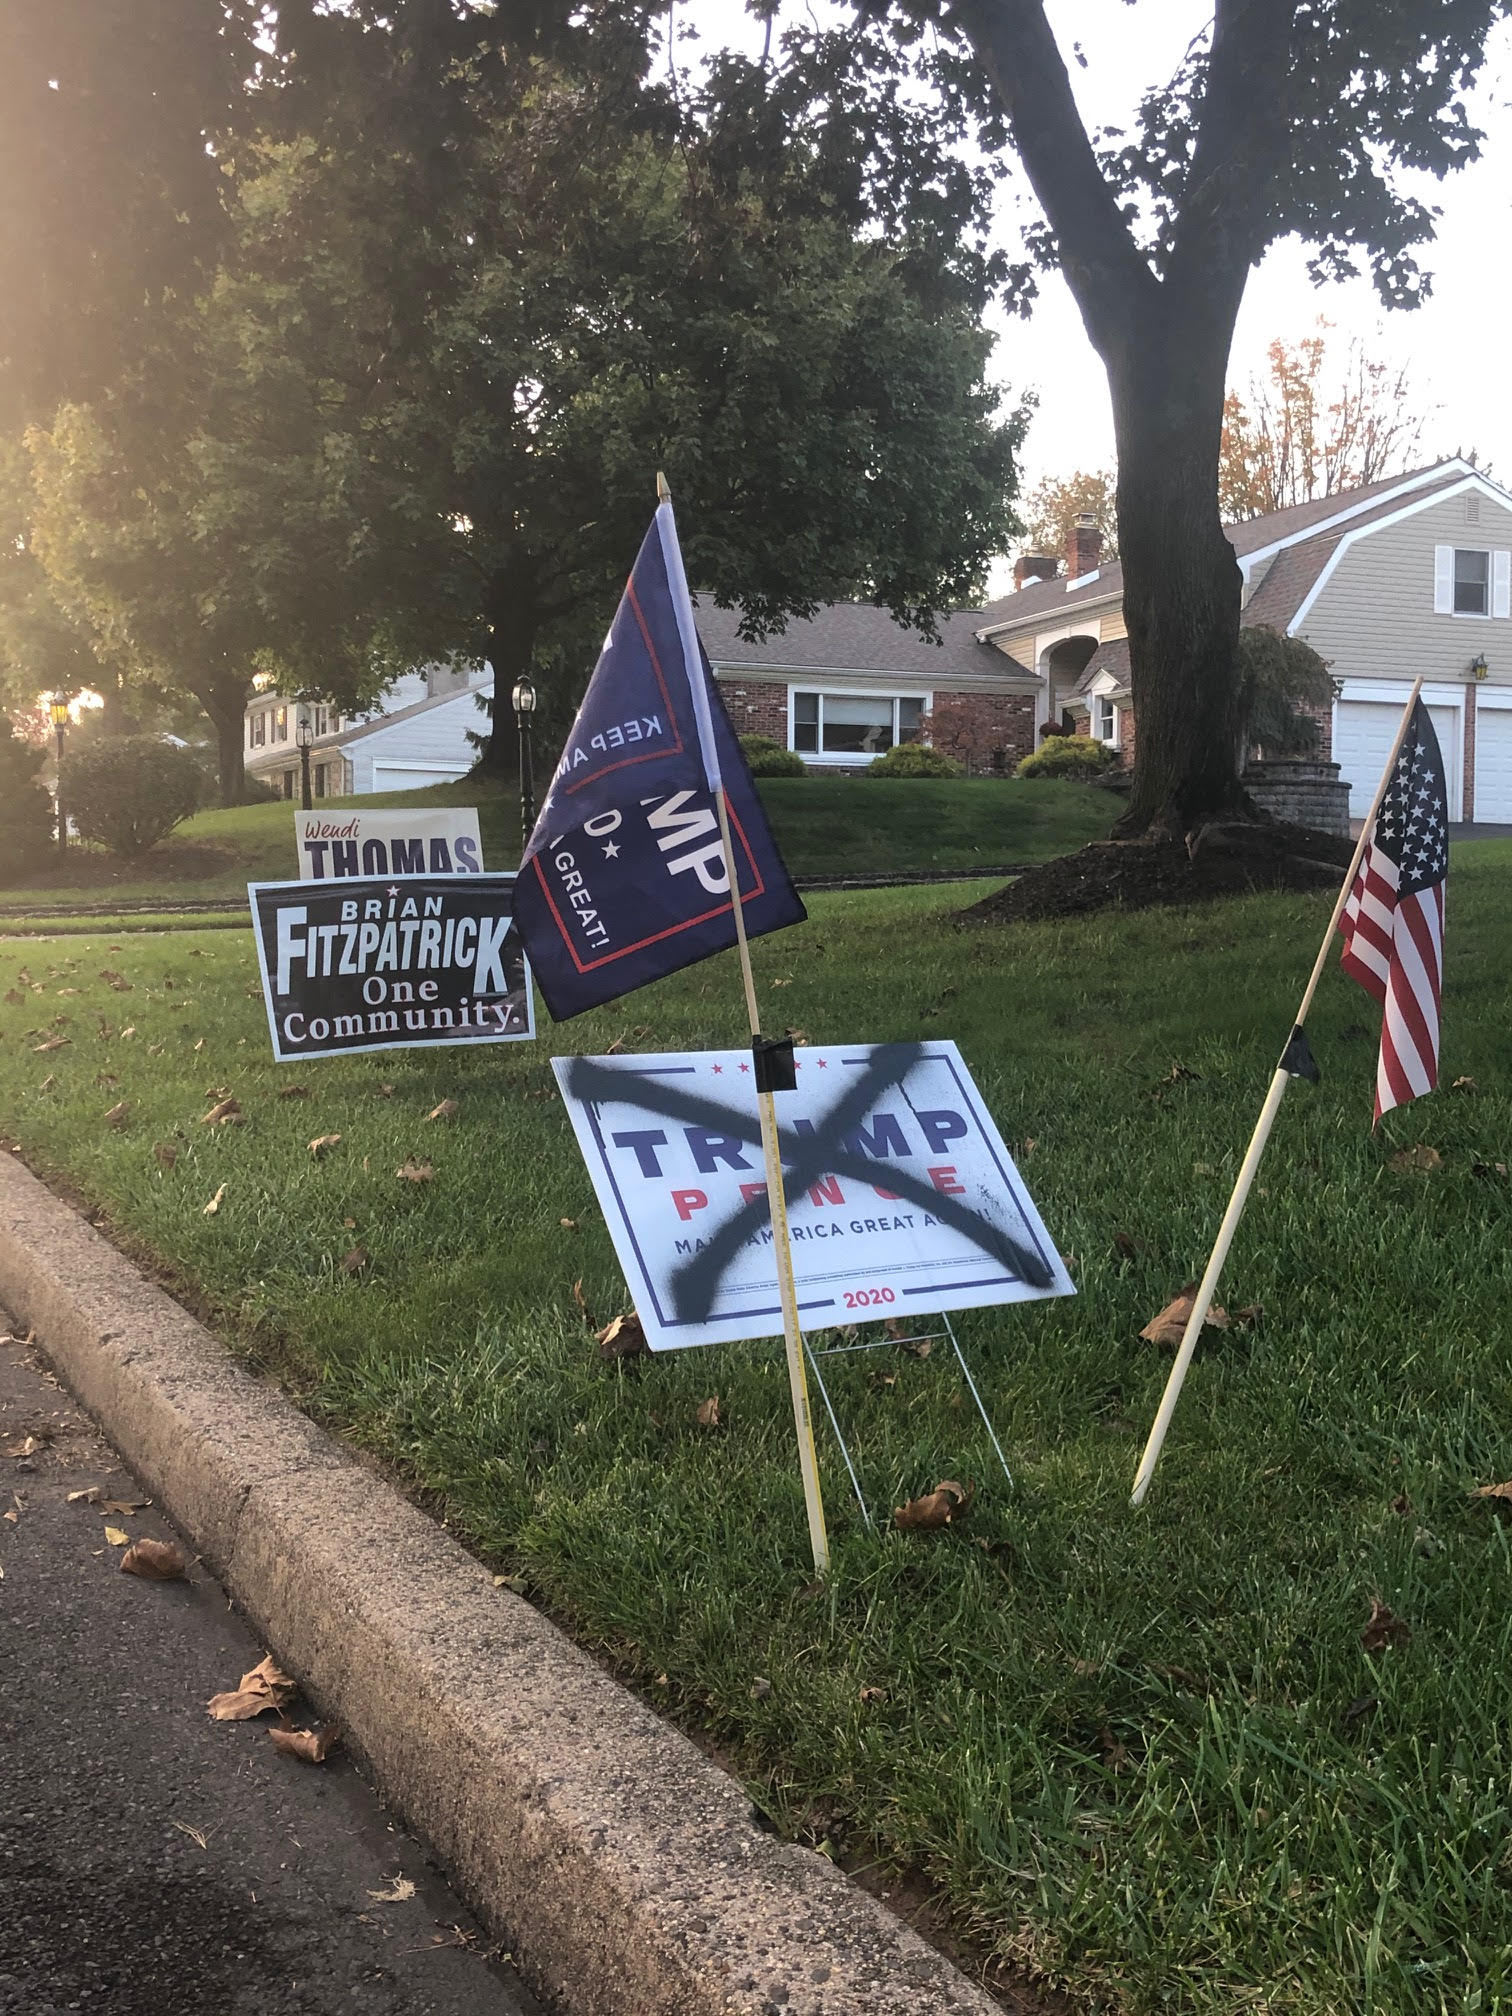 In Kathryn Jankowski's home of Bucks County, PA, front lawns are littered with competing political signs. (In Kathryn Jankowski's home of Bucks County, PA, front lawns are littered with competing political signs.)